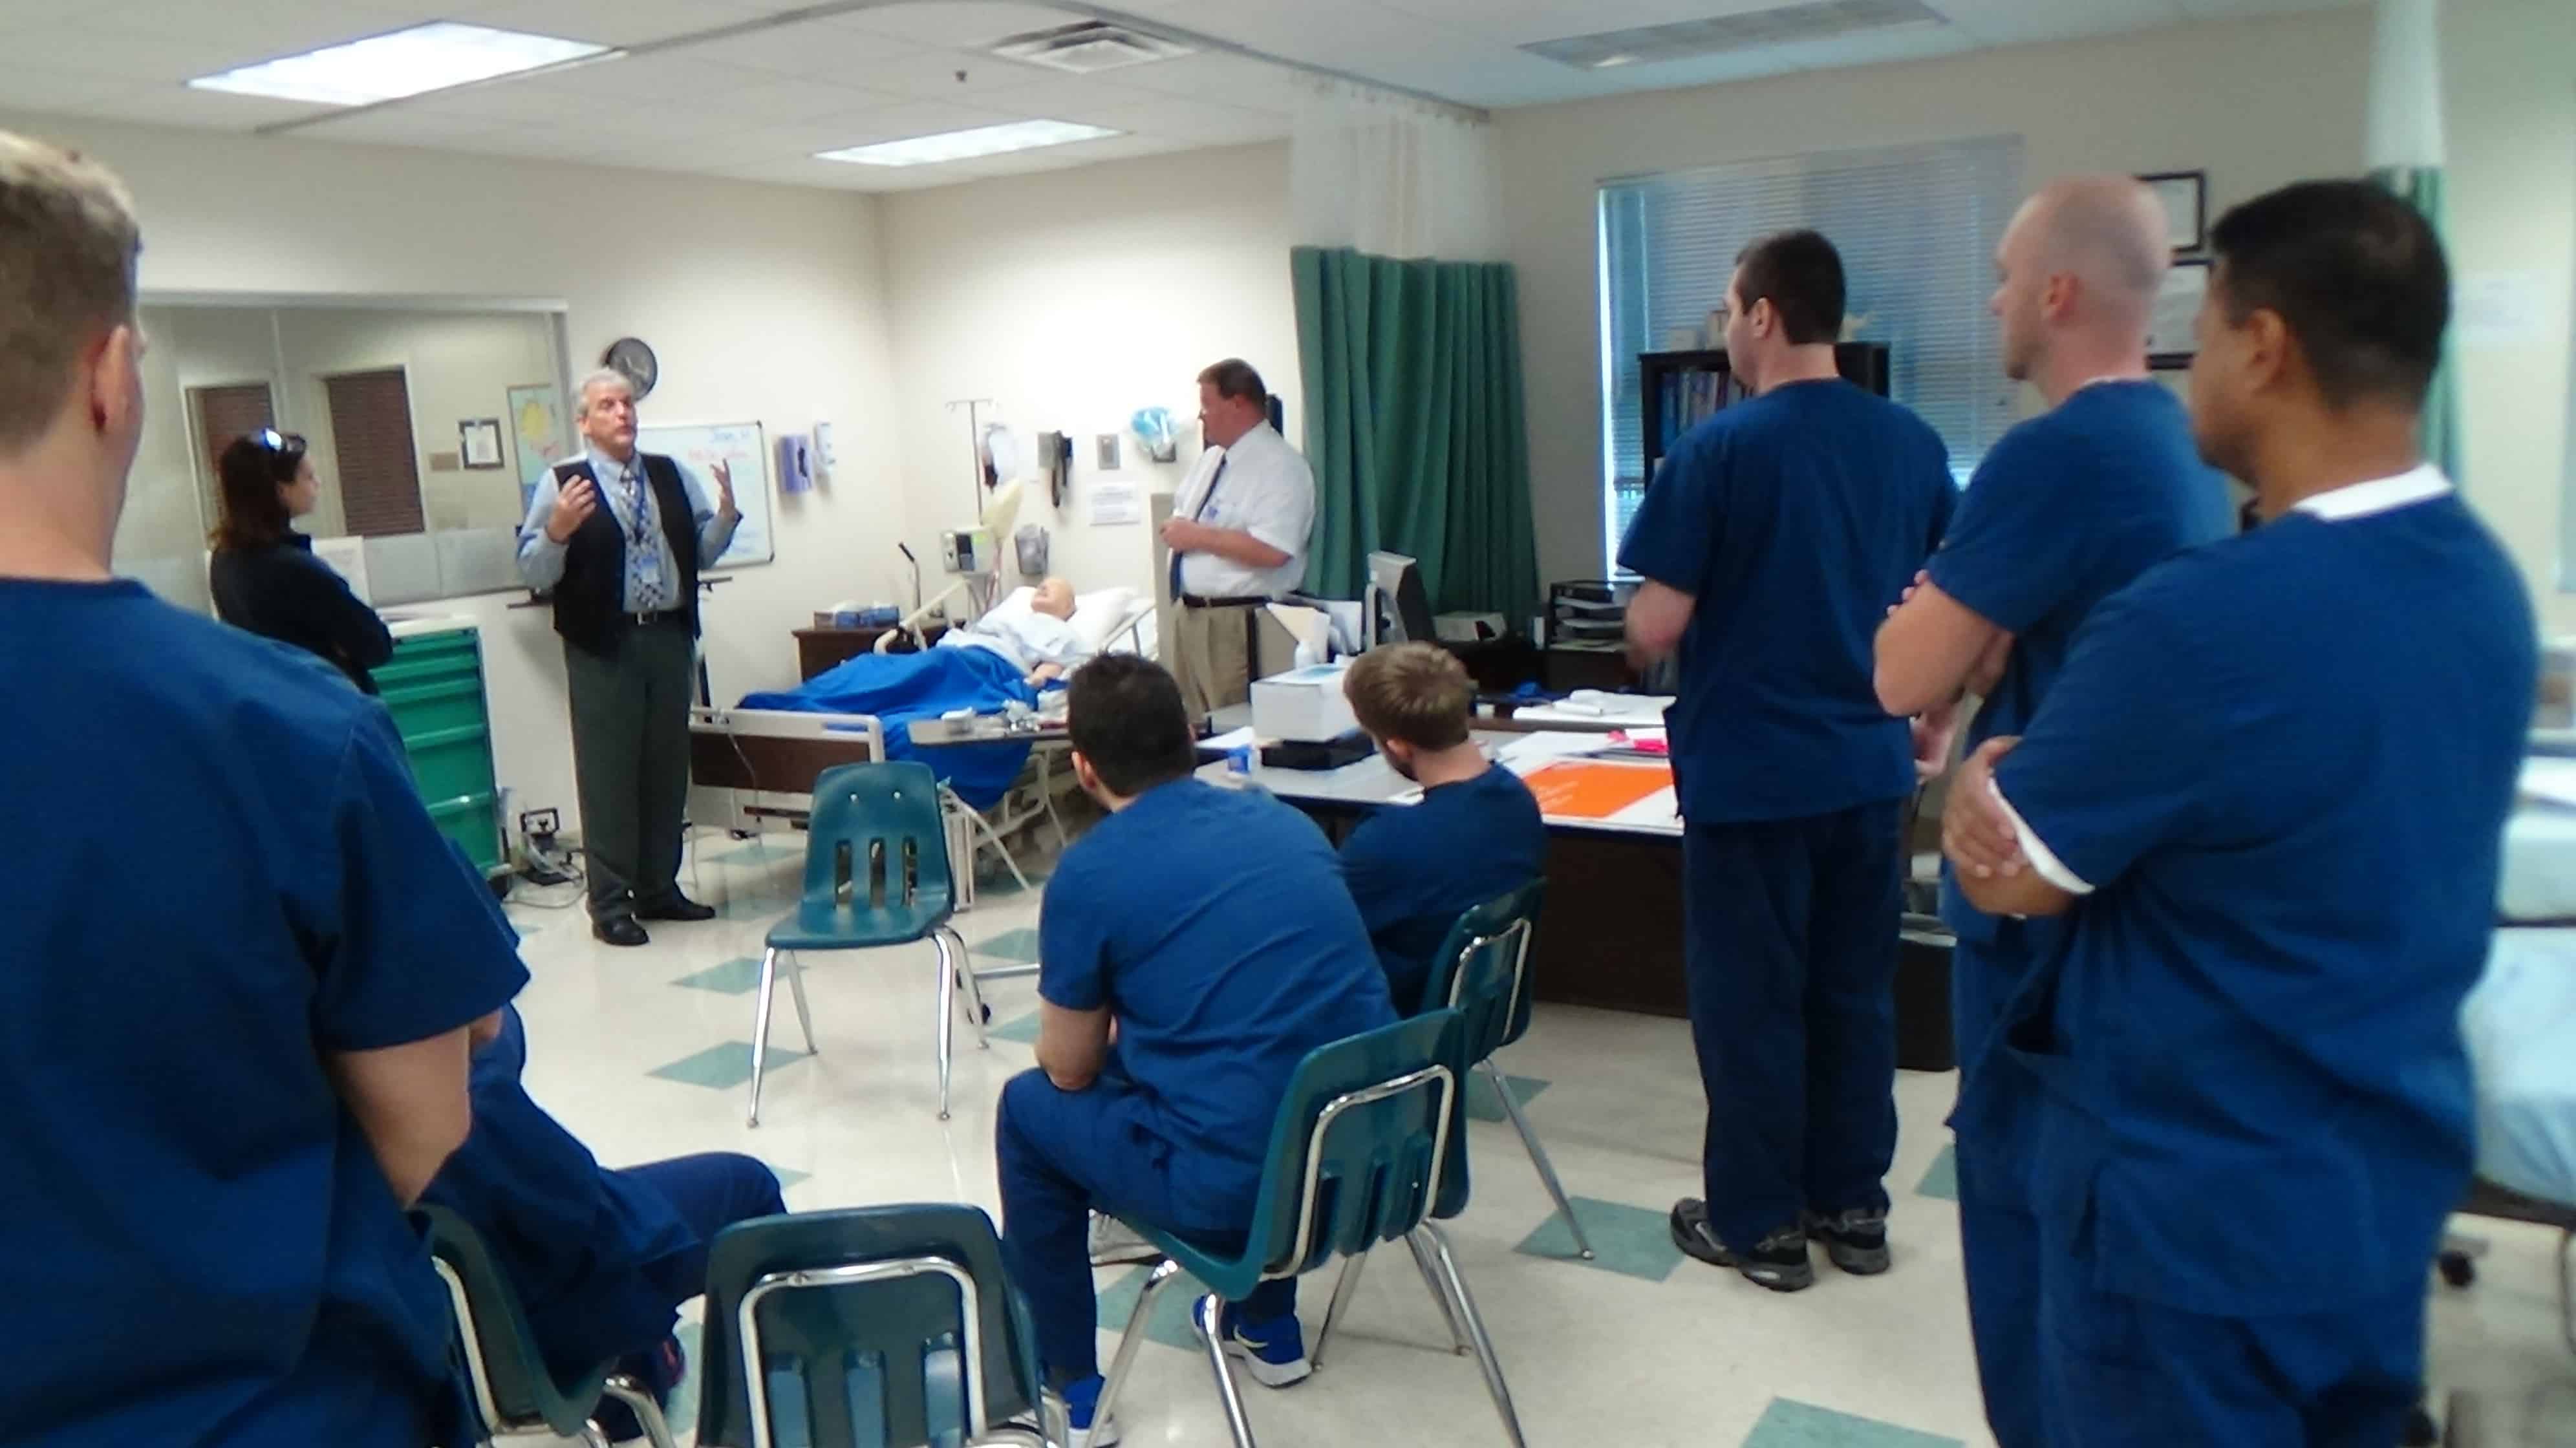 Physical Therapy Assistant Students at the Sarasota Campus Spend Time in Sim Lab